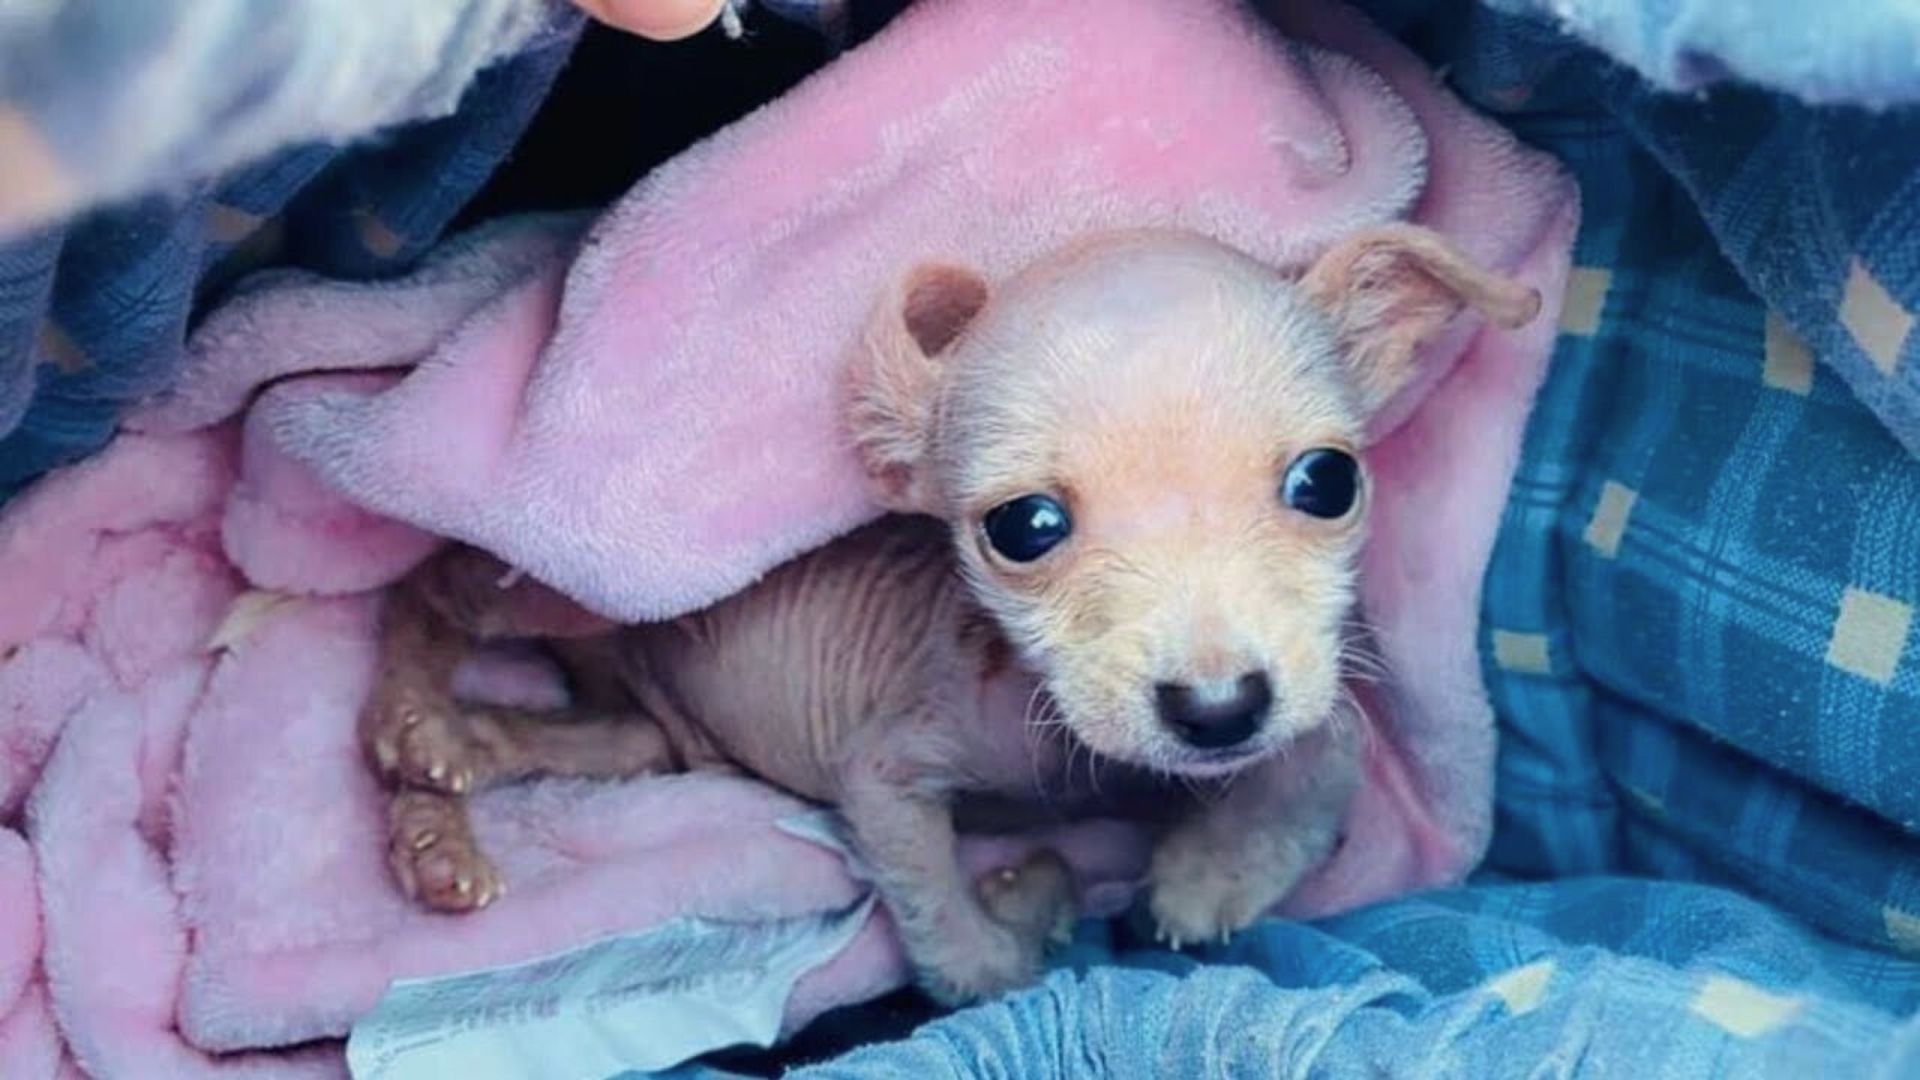 This Disabled Pup Only Weighted 1 Pound, But Then Met Someone Special Who Changed His Life